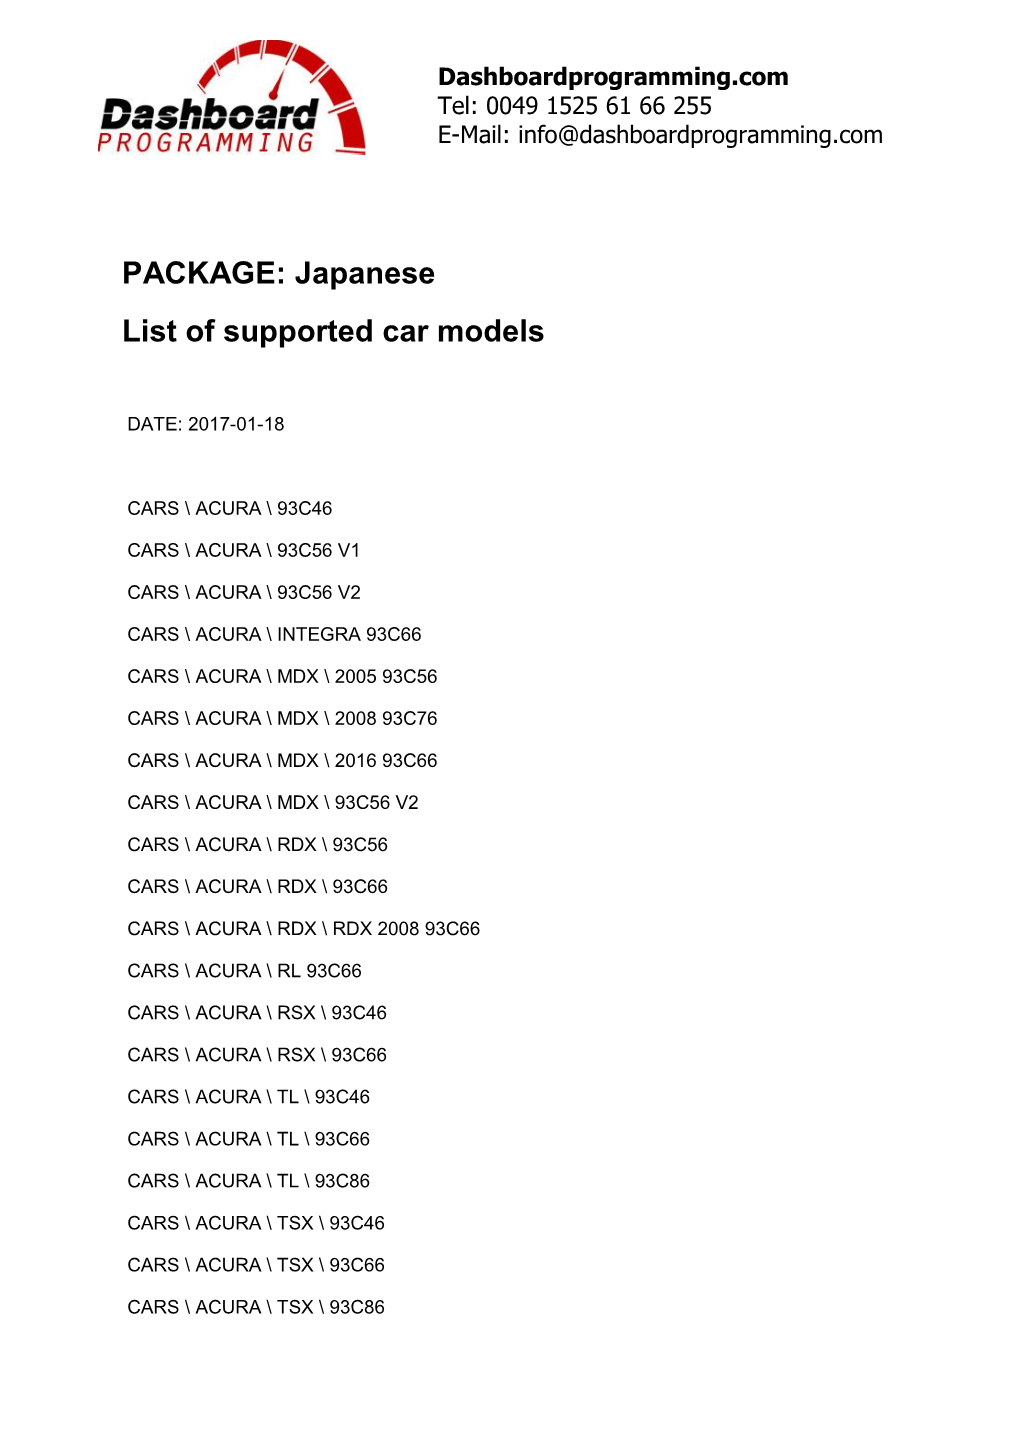 PACKAGE: Japanese List of Supported Car Models